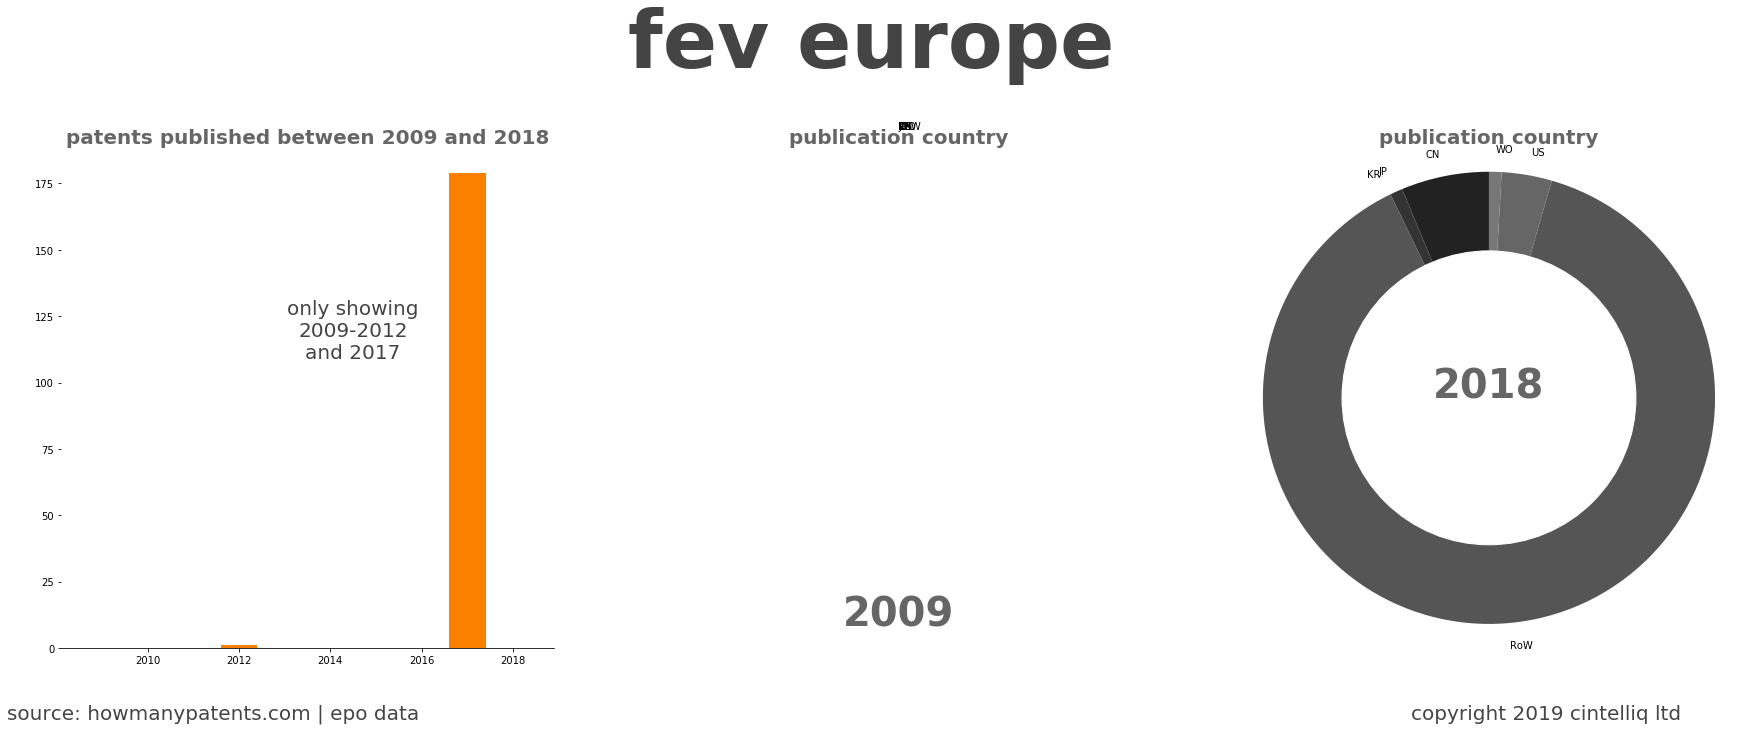 summary of patents for Fev Europe